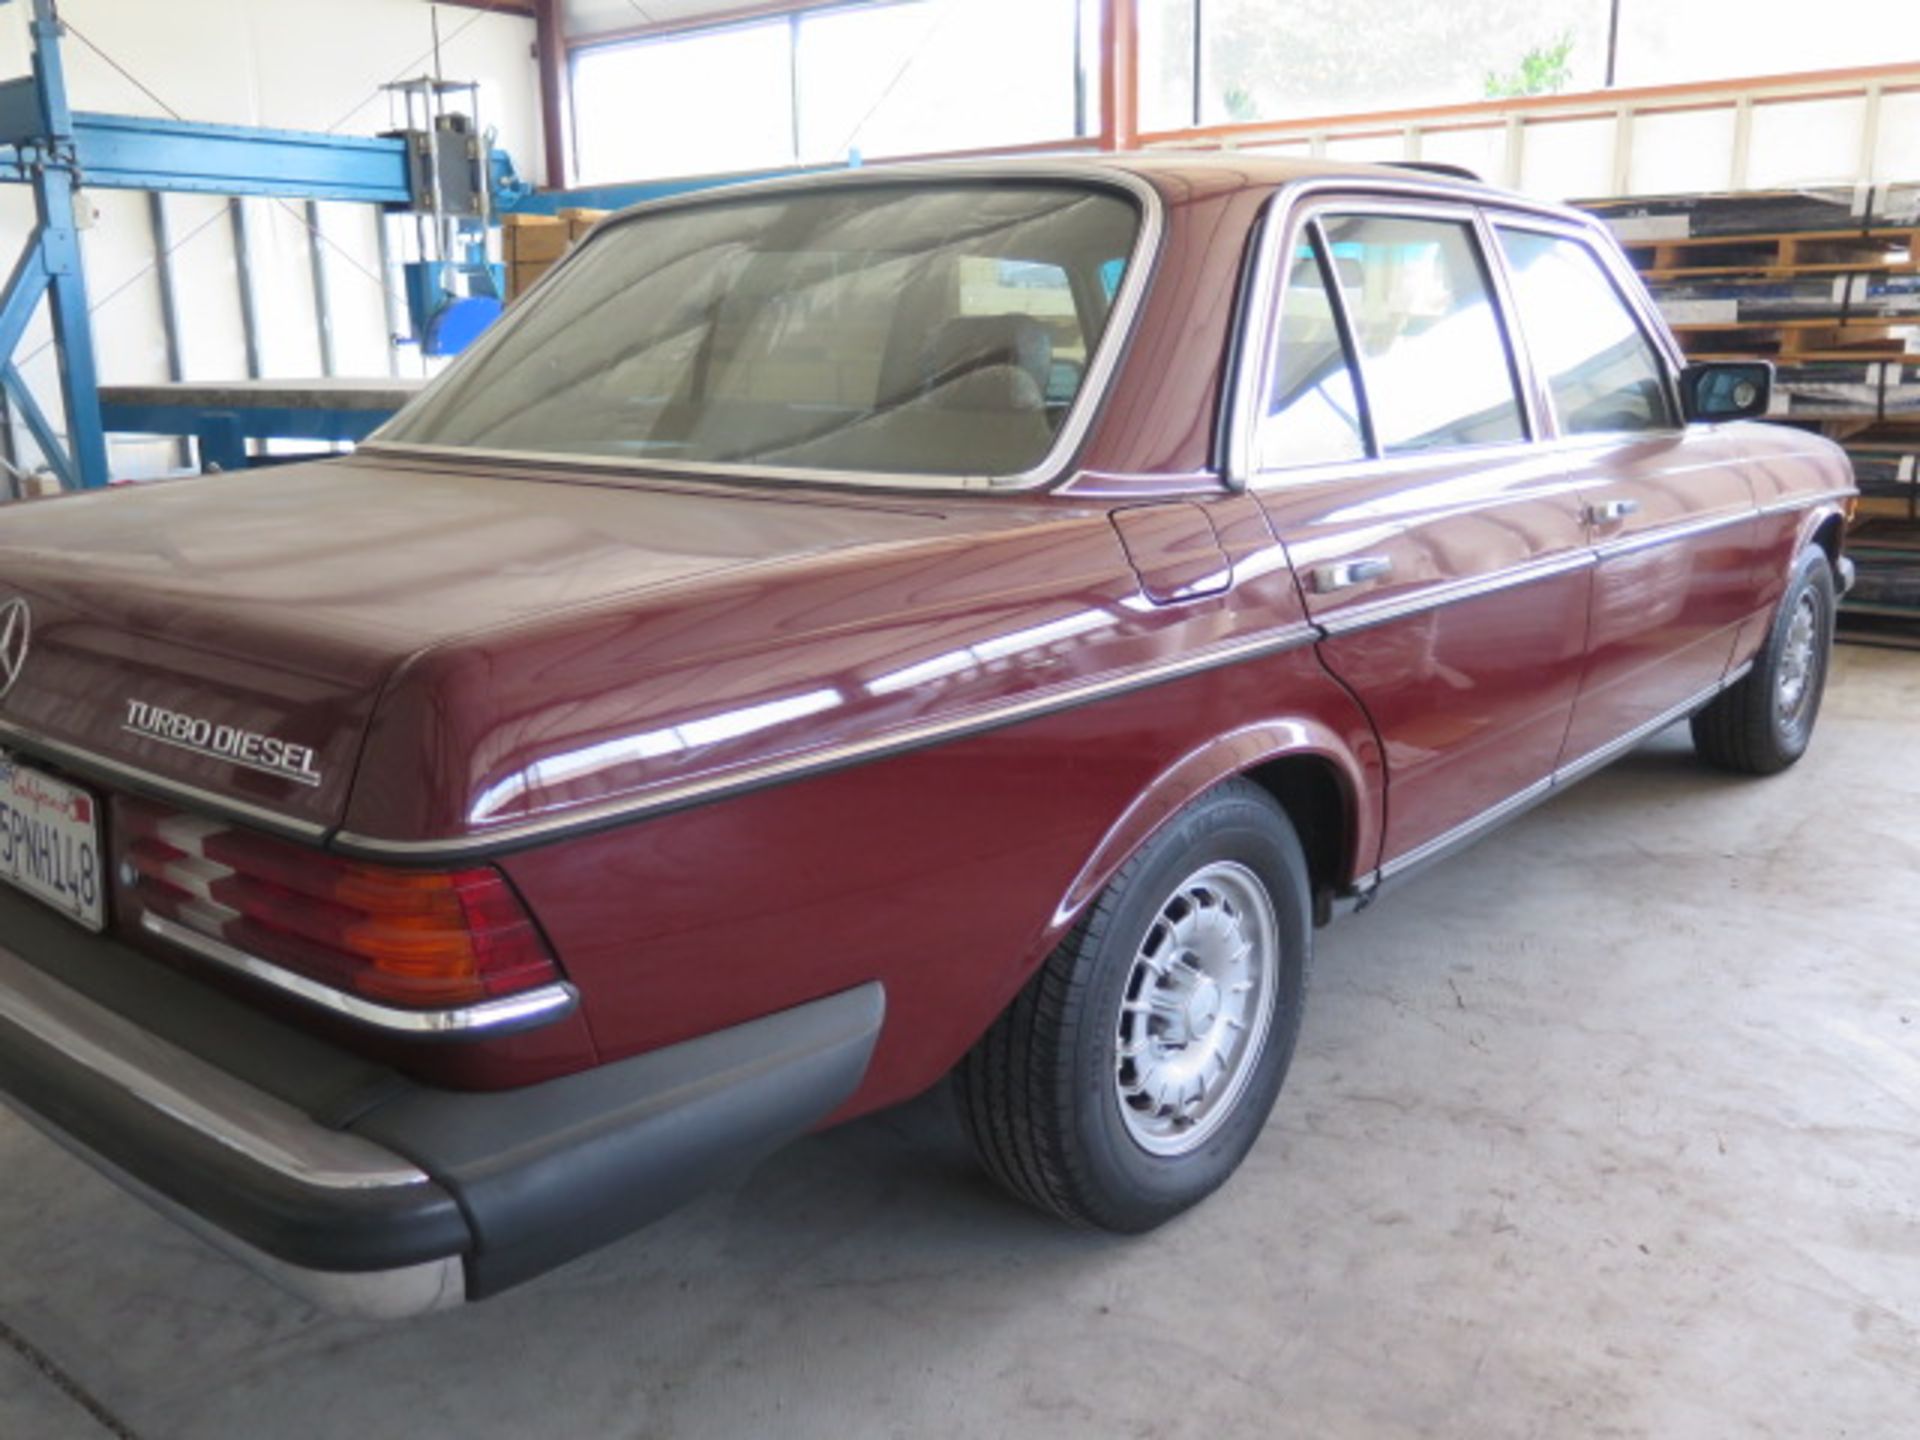 1984 Mercedes 300 Turbo Diesel 4-Door Coupe Lisc 5PNH148 w/ 3L Diesel, Auto Trans, 236, SOLD AS IS - Image 2 of 25